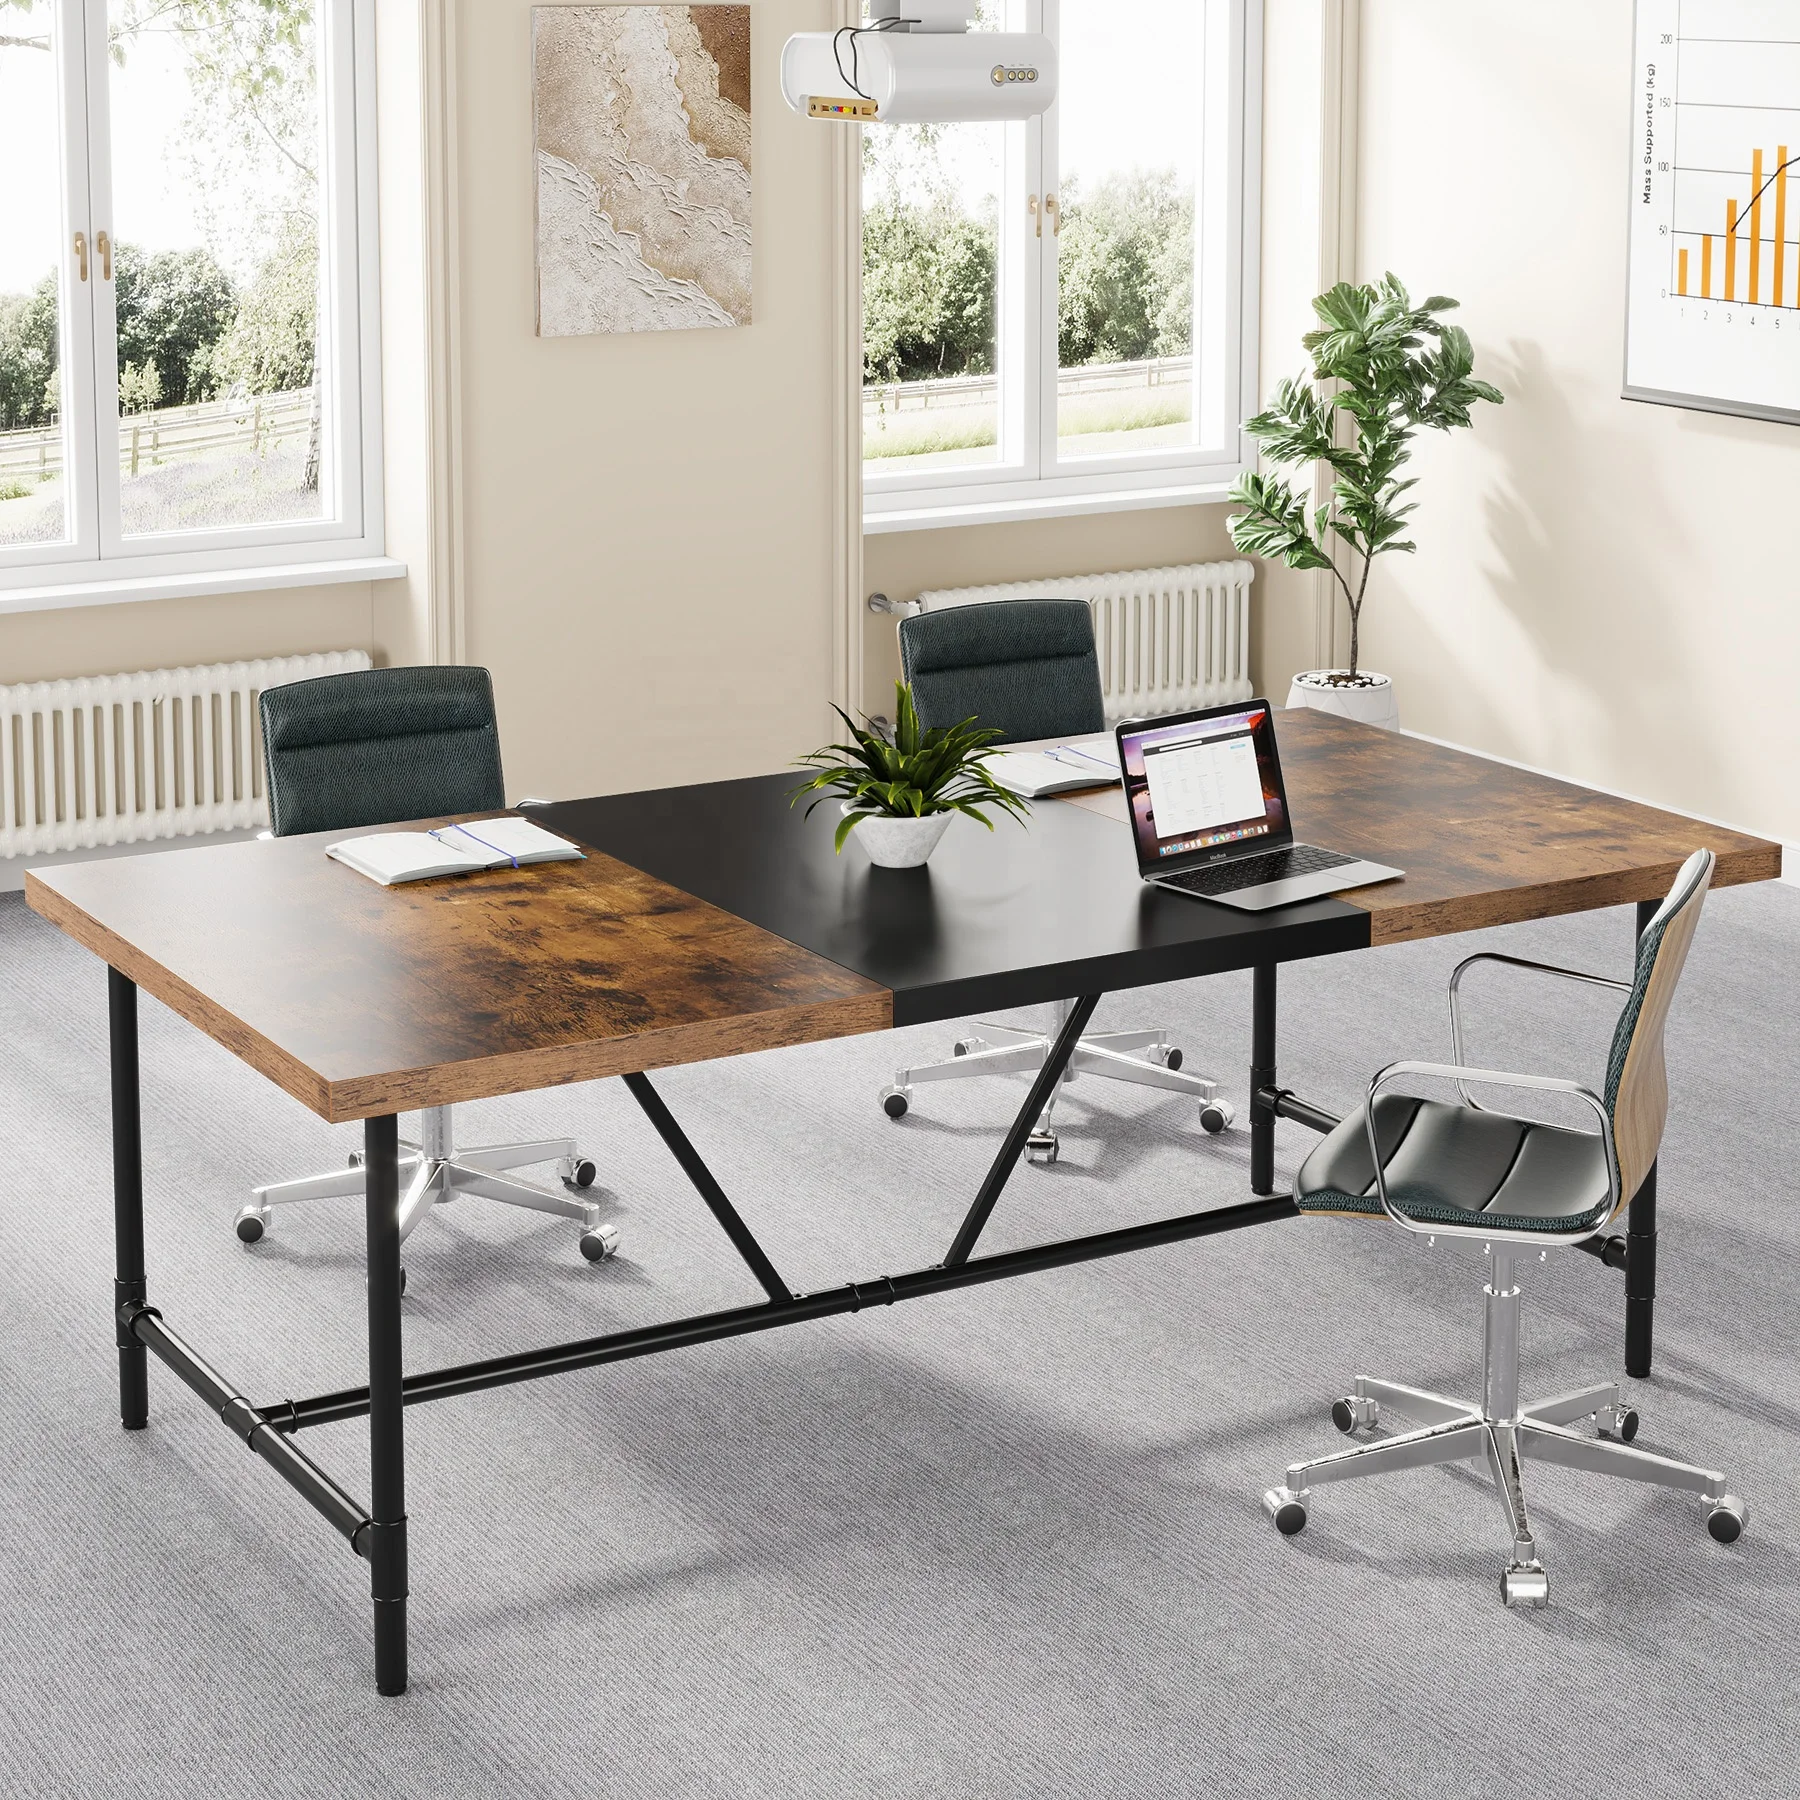 Small Conference Meeting Table Room Tables with Pipe Metal Frame Rectangular Training Seminar Table for Home Office